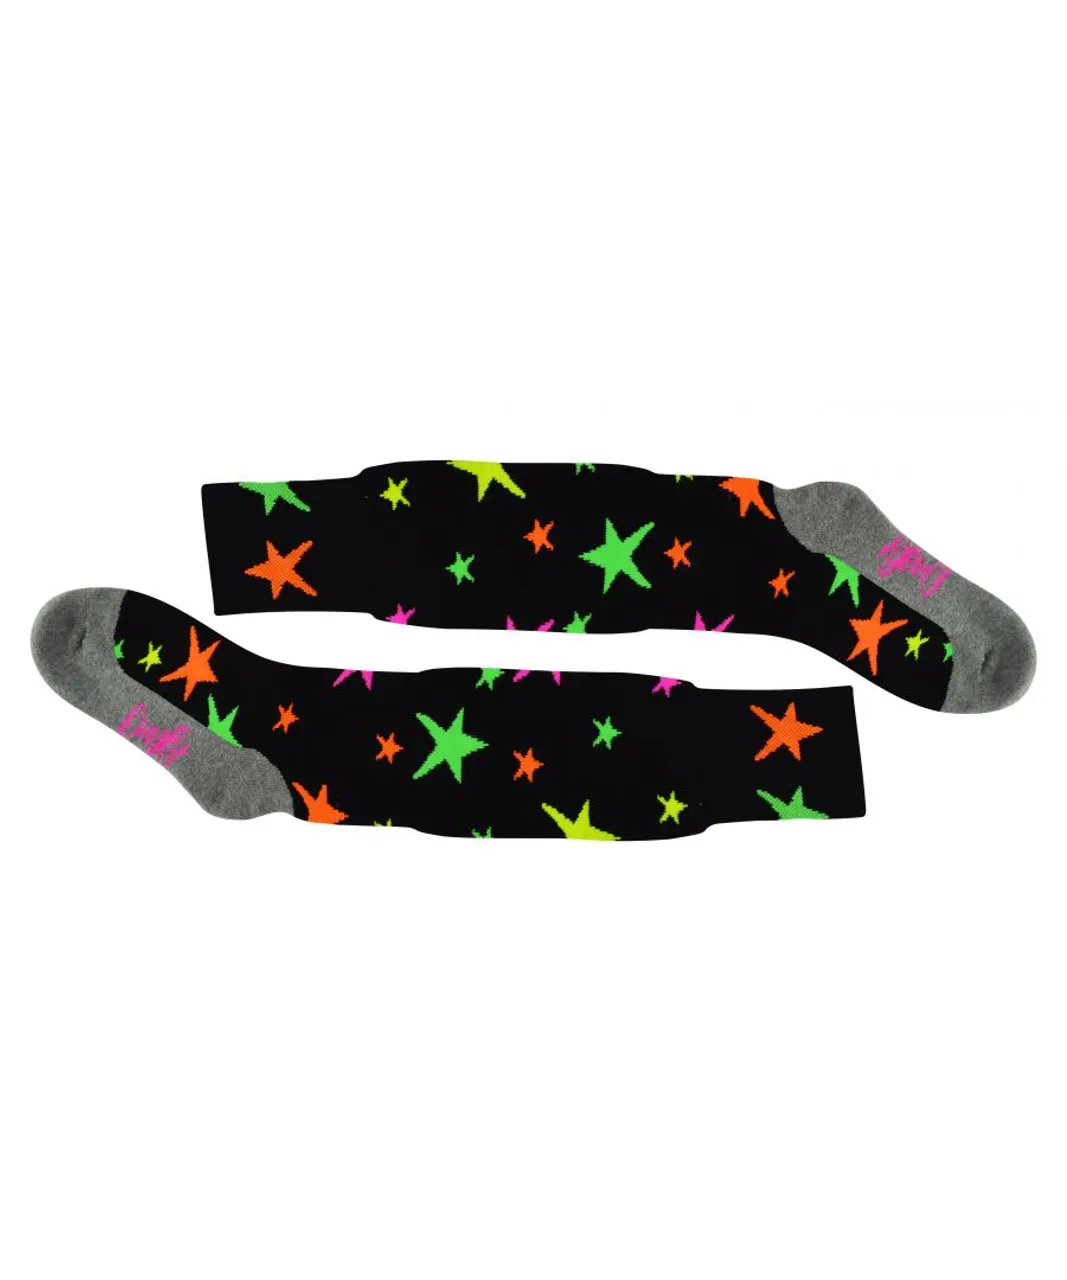 Hingly Boys Hockey Socks with Colourful Cool Funny Funky Designs